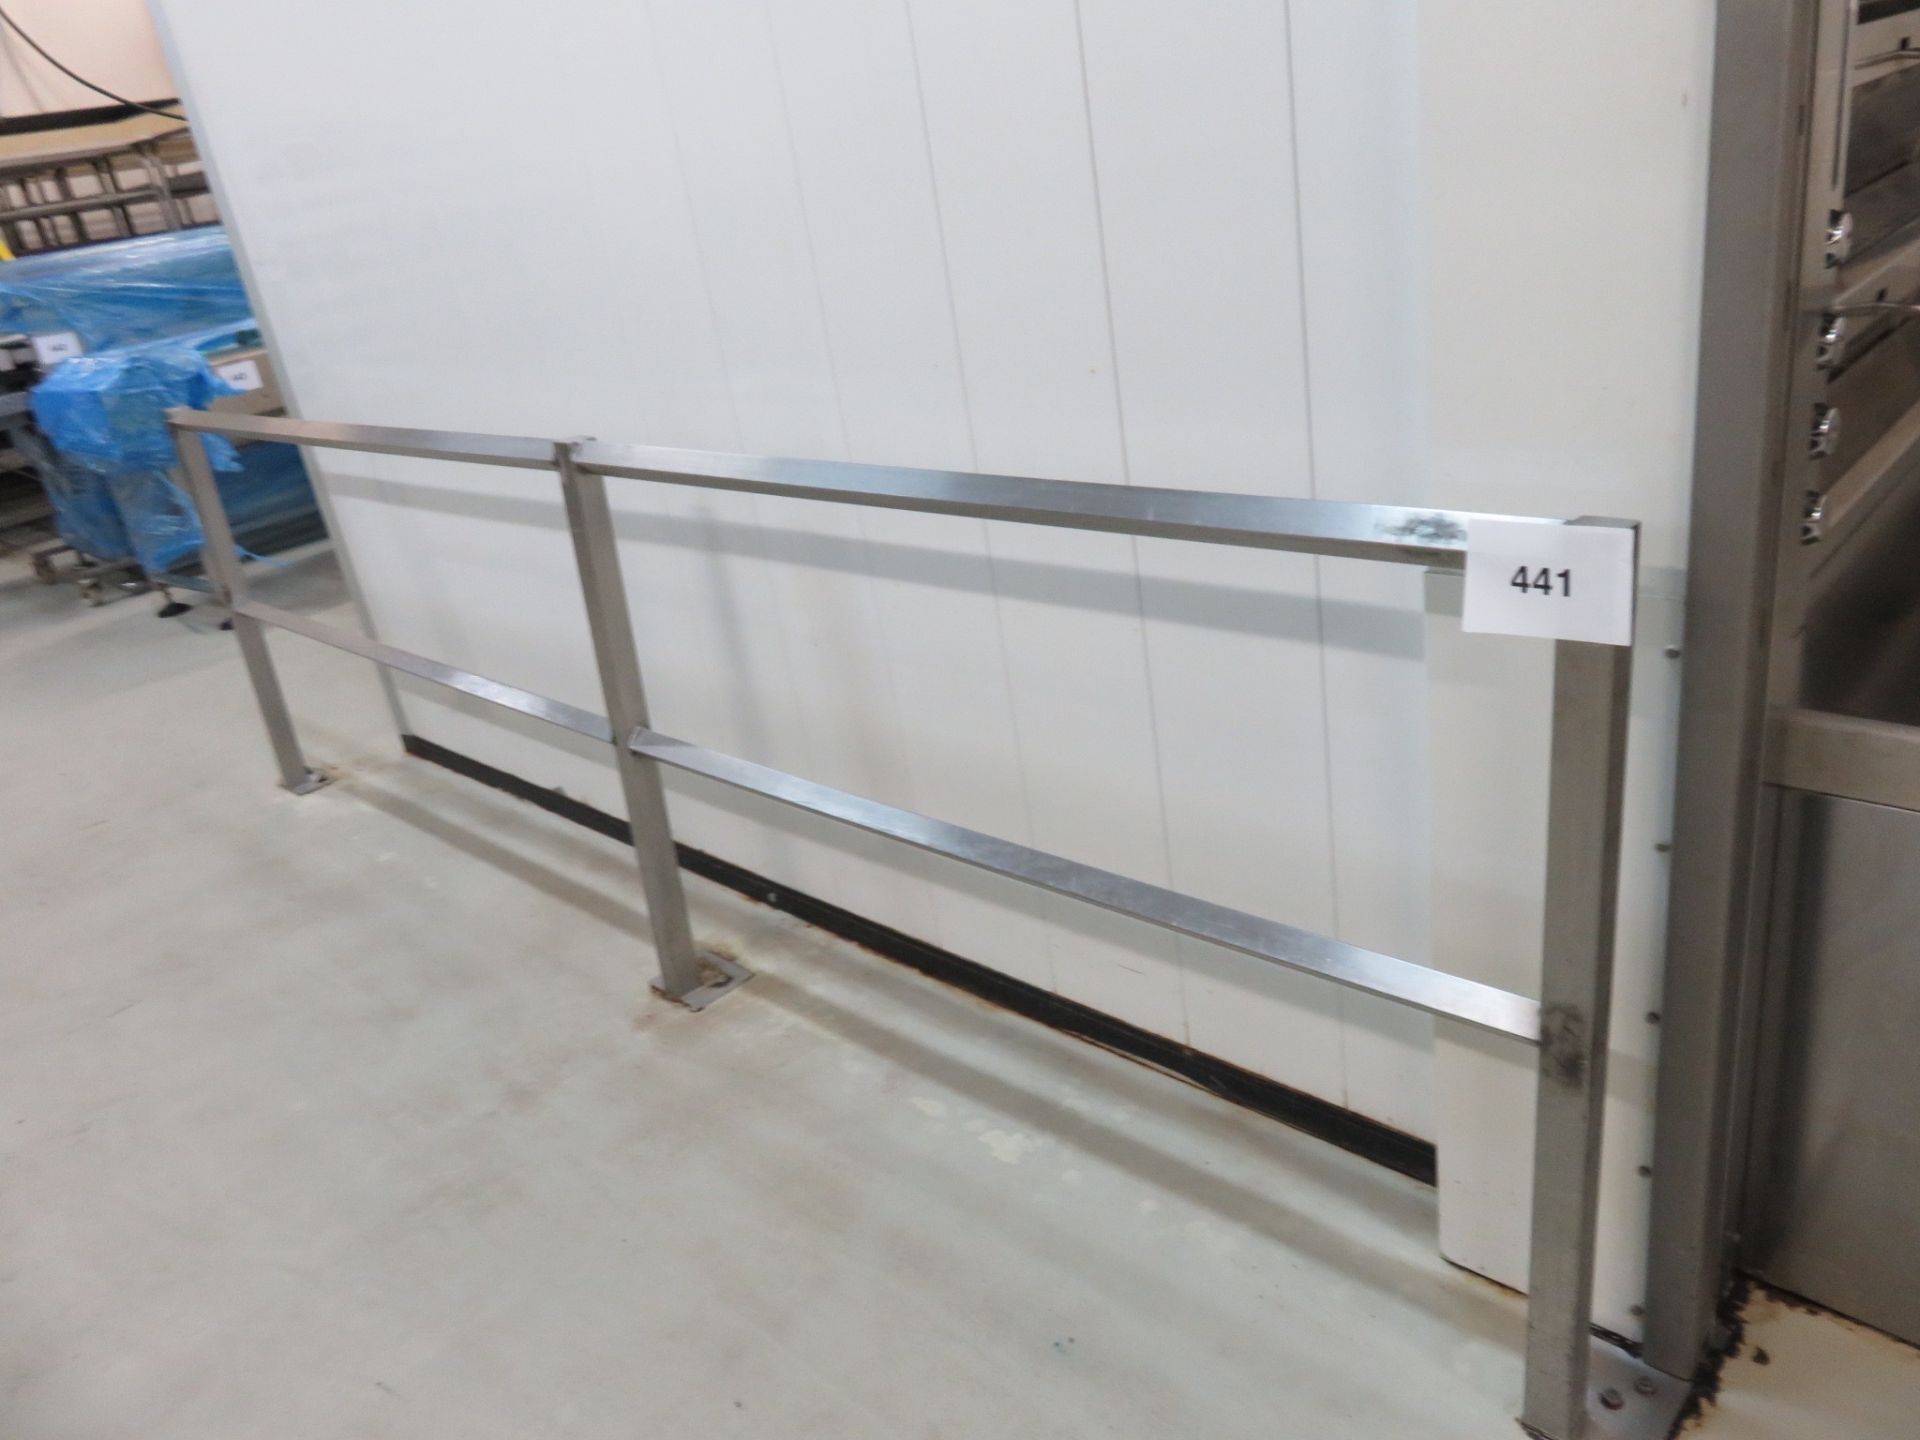 S/s Bumper Bar. Approx 2300mm long x 800mm high. lift out charge £20